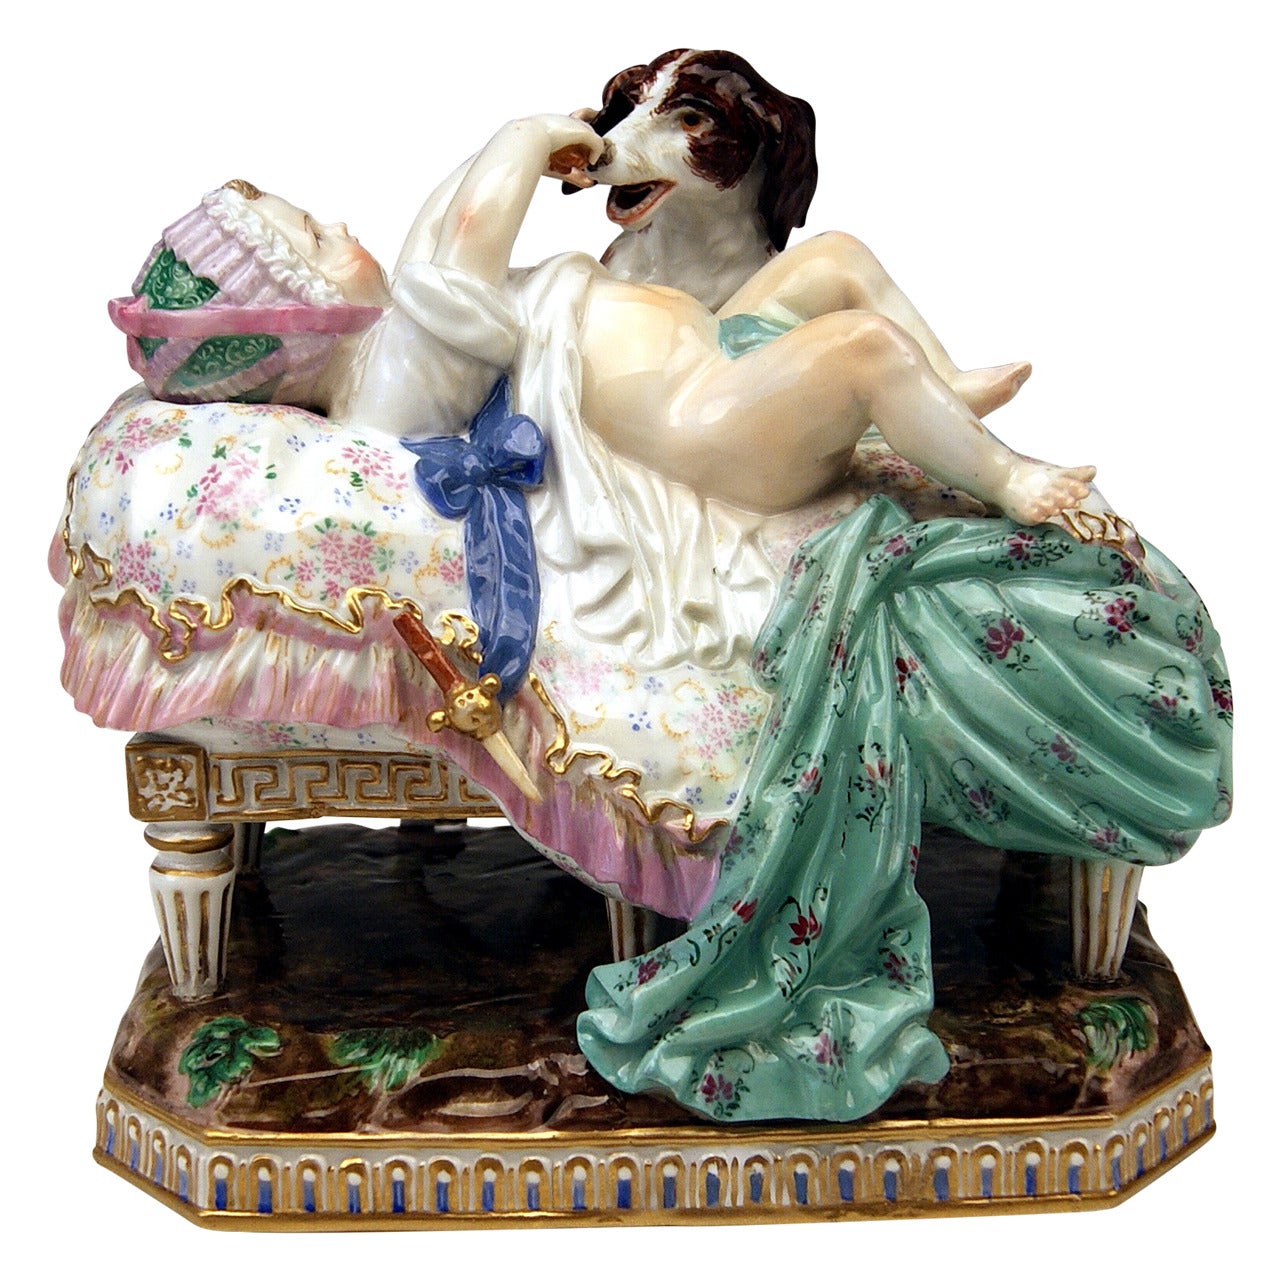 Meissen Lovely Figurine Group by Acier of the Placidness of Childhood, 1840